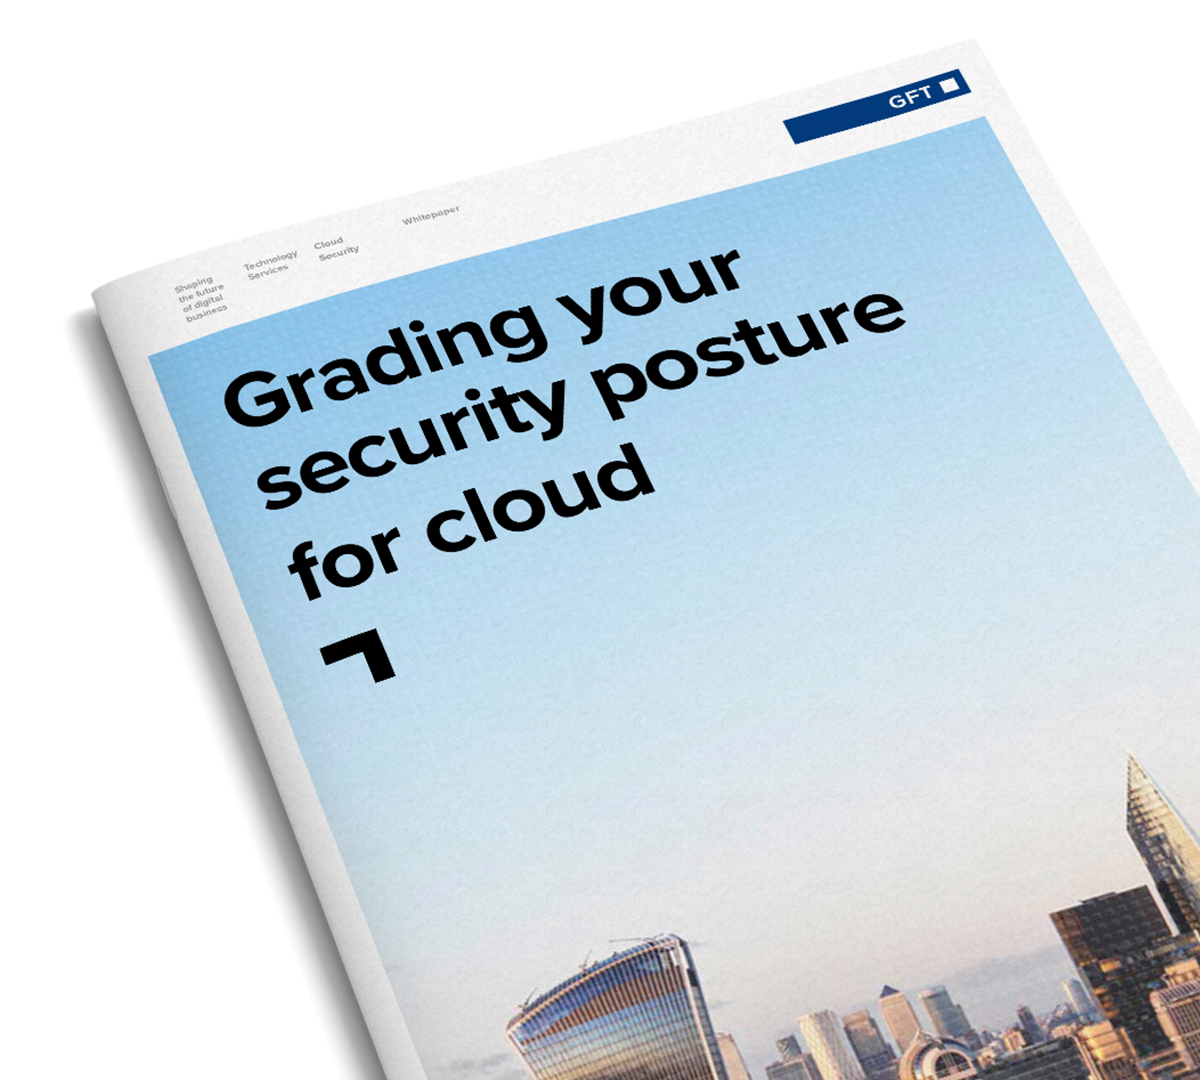 Thought Leadership: Grading your security posture for cloud